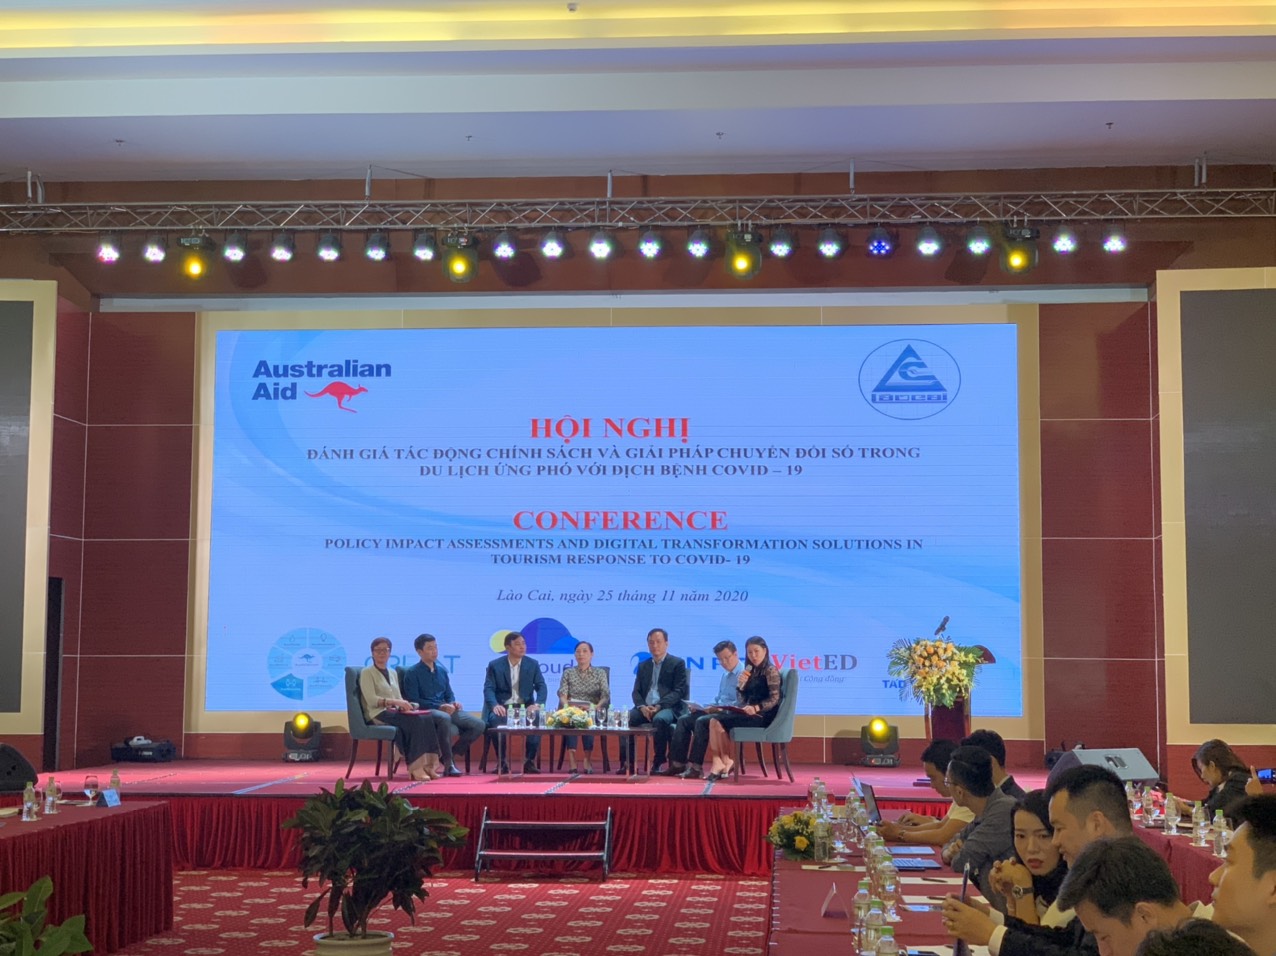 Lao Cai organizes a conference to assess the impact of policies and solutions for digital transformation in tourism in response to the COVID-19 epidemic